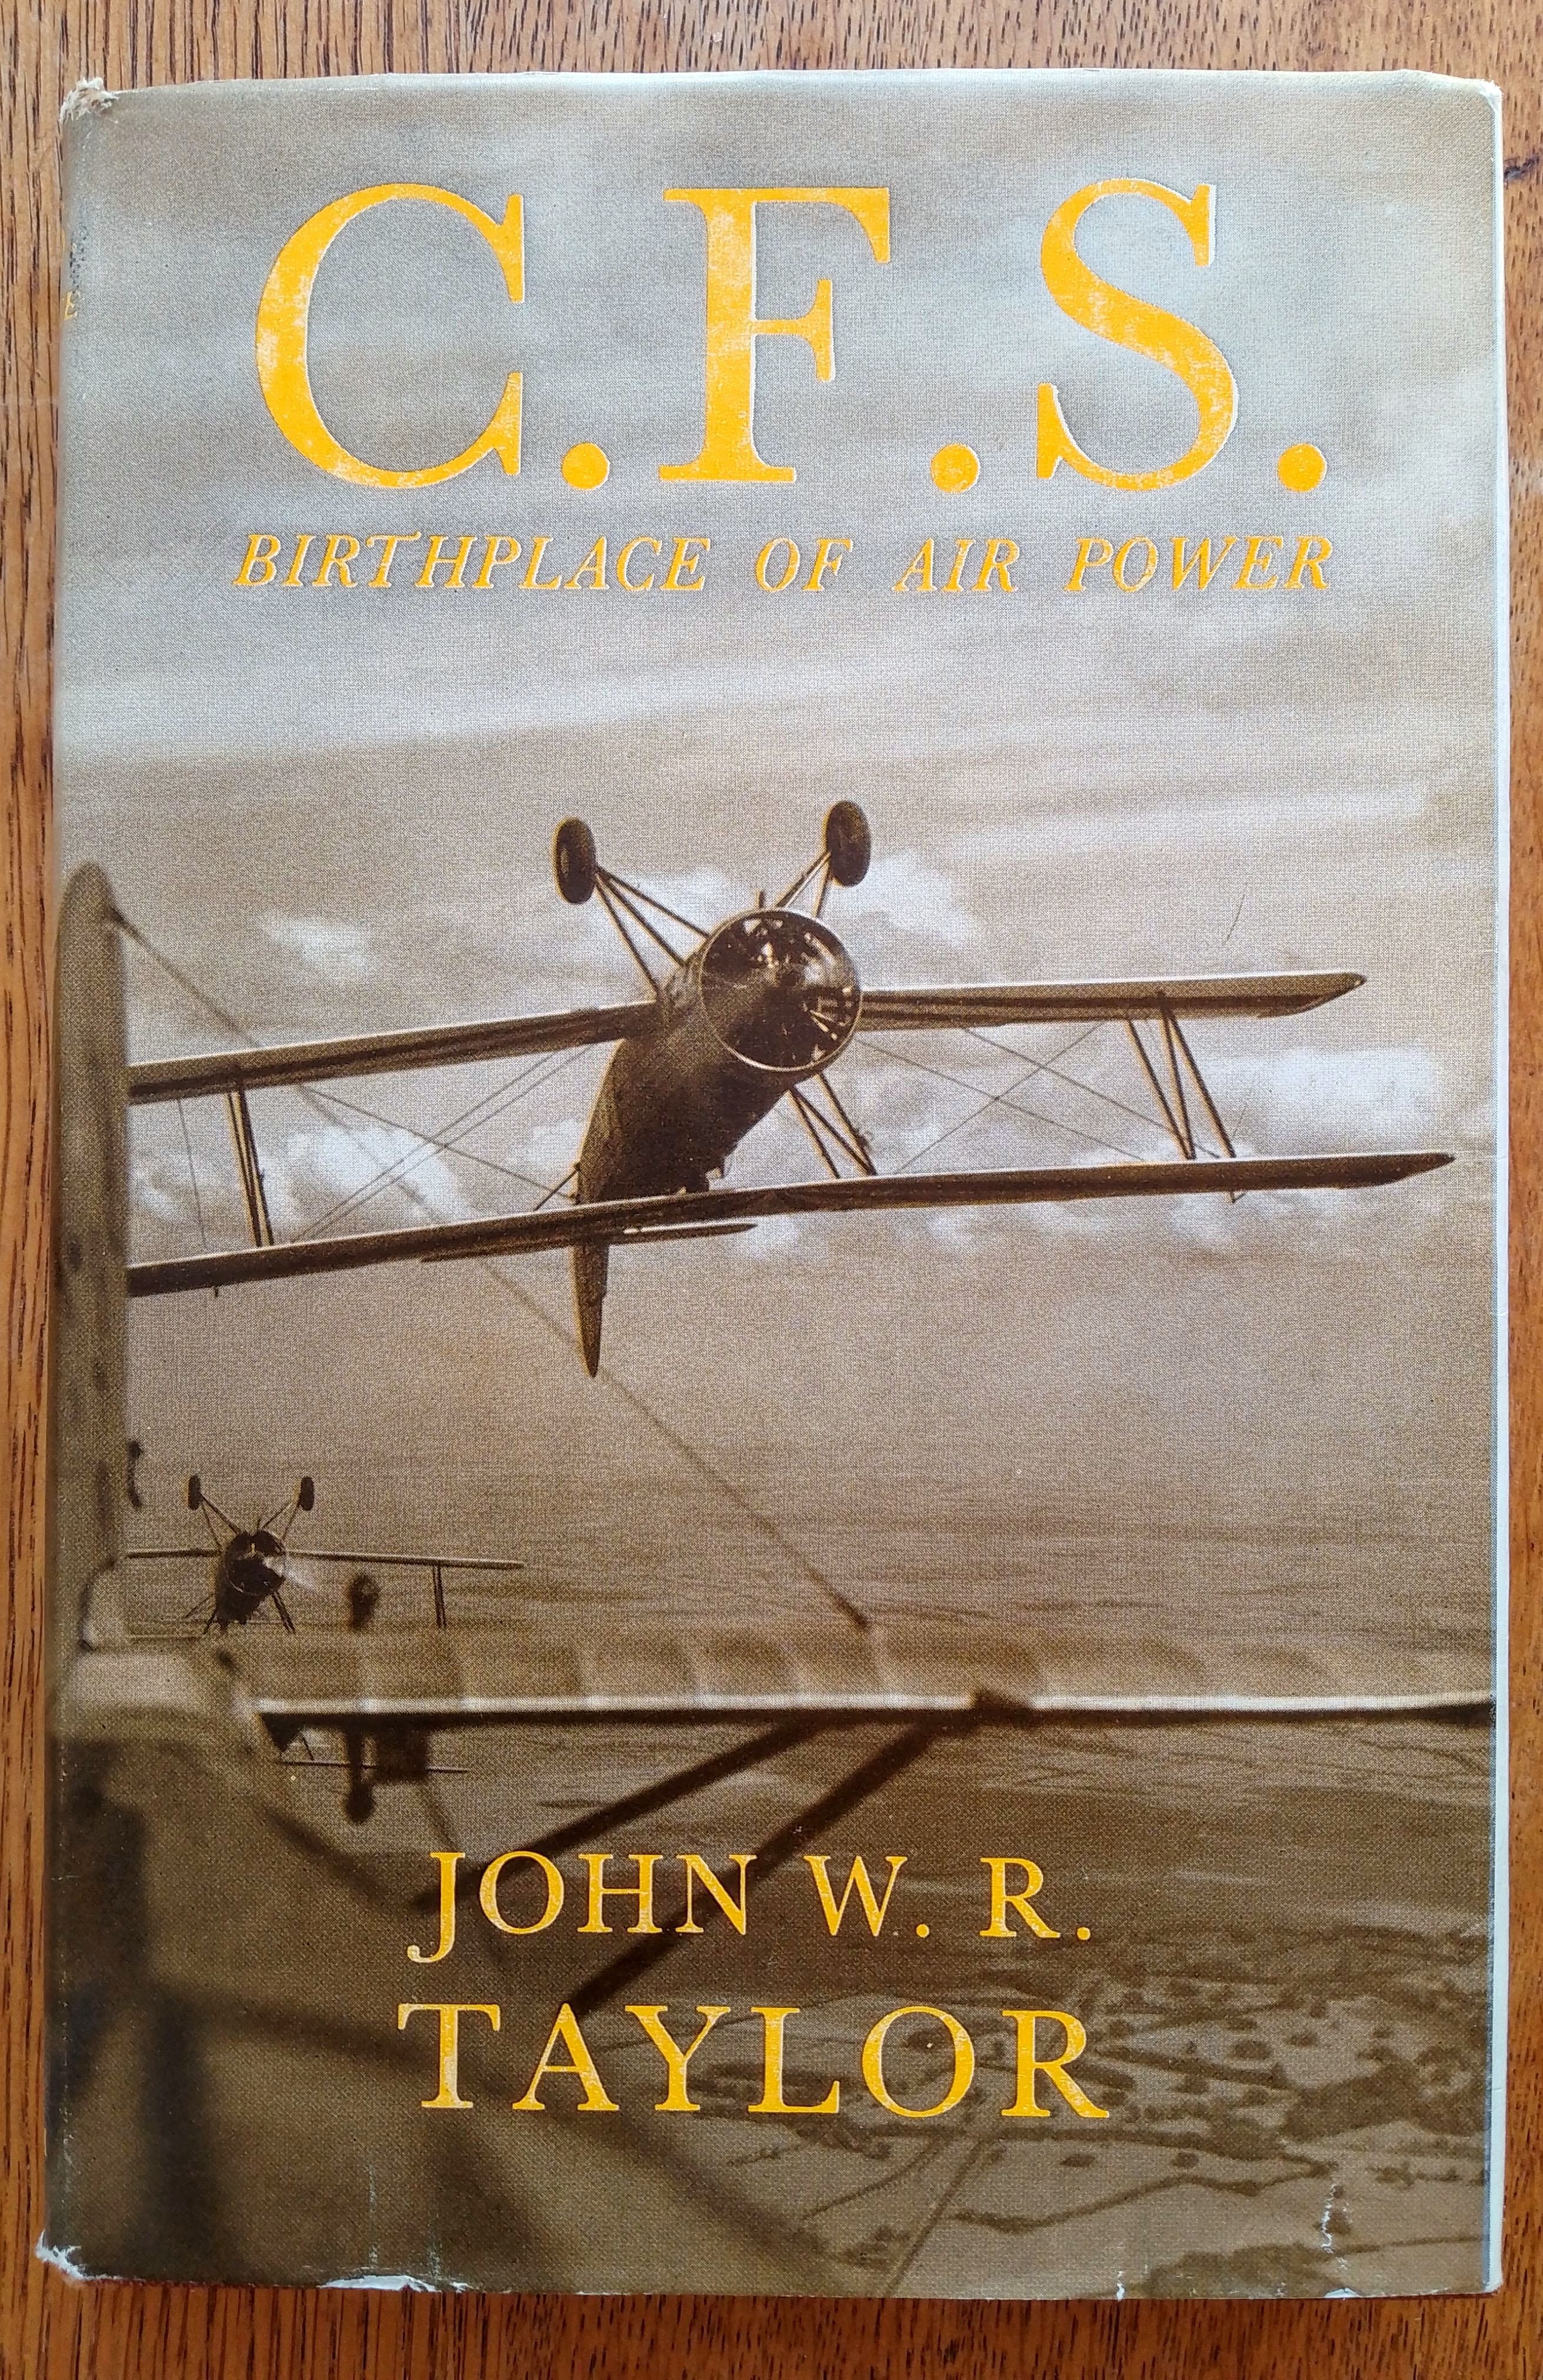 C F S Birthplace of Air Power by John W R Taylor